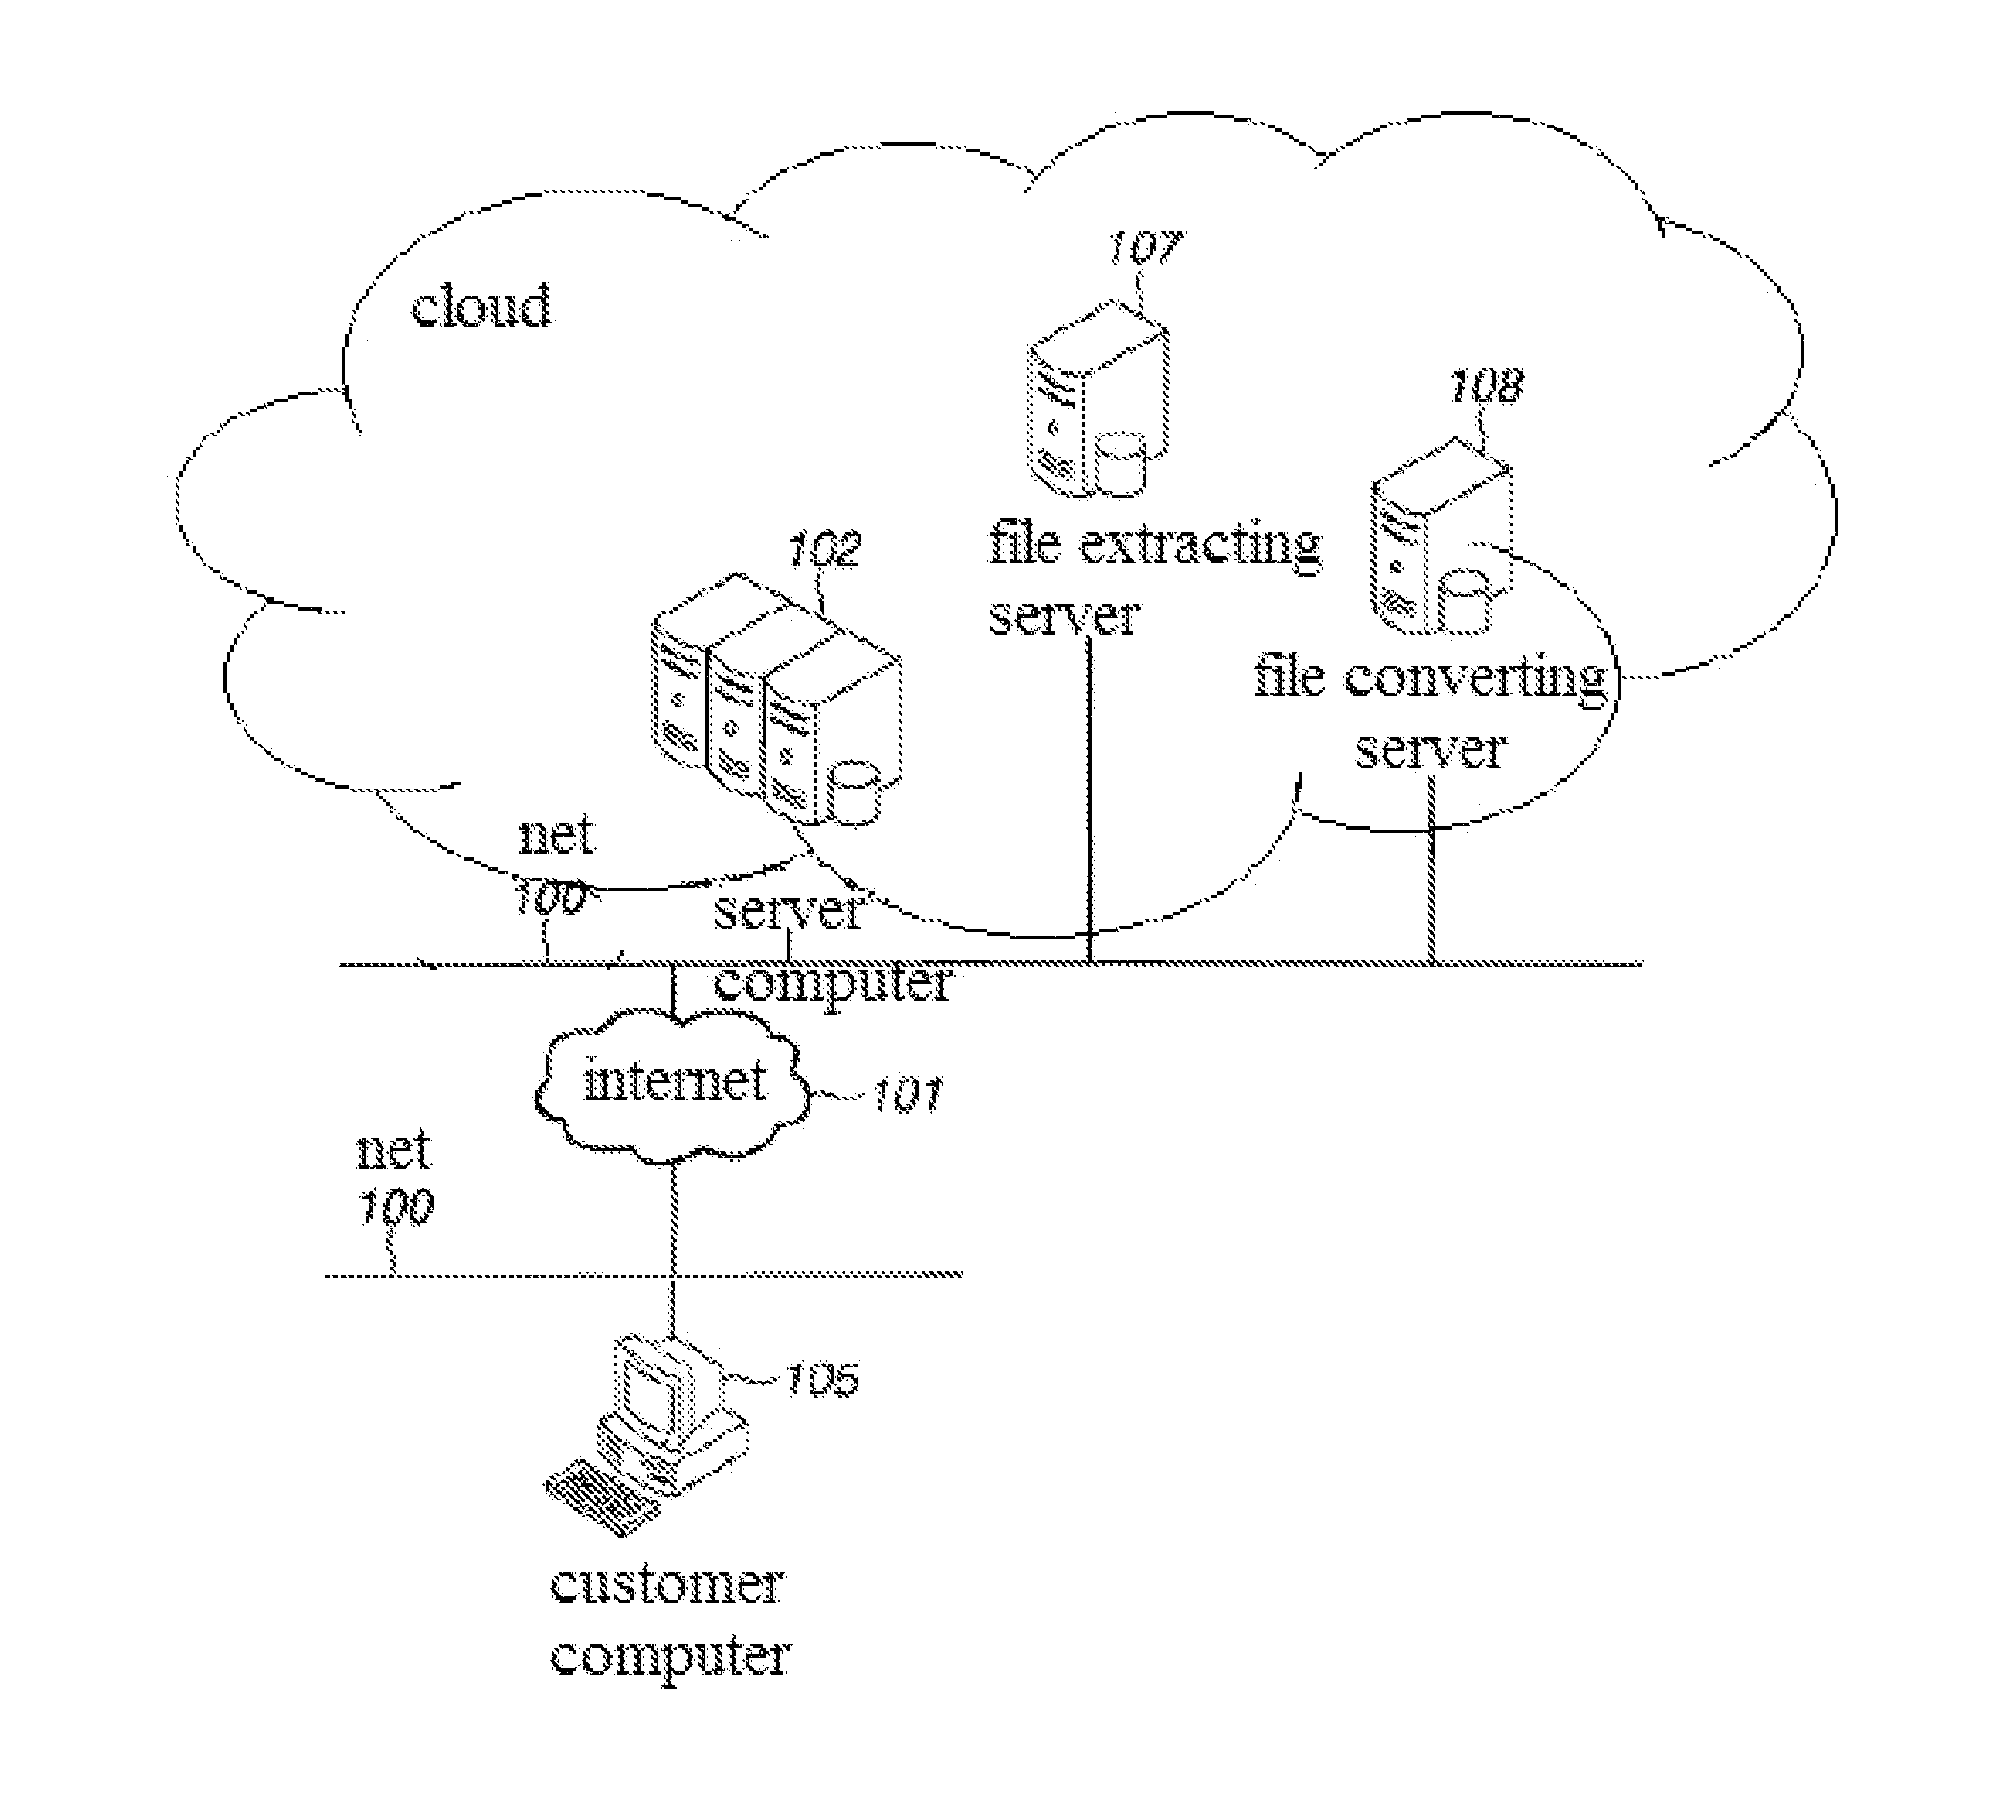 Large-scale data processing cloud computing system